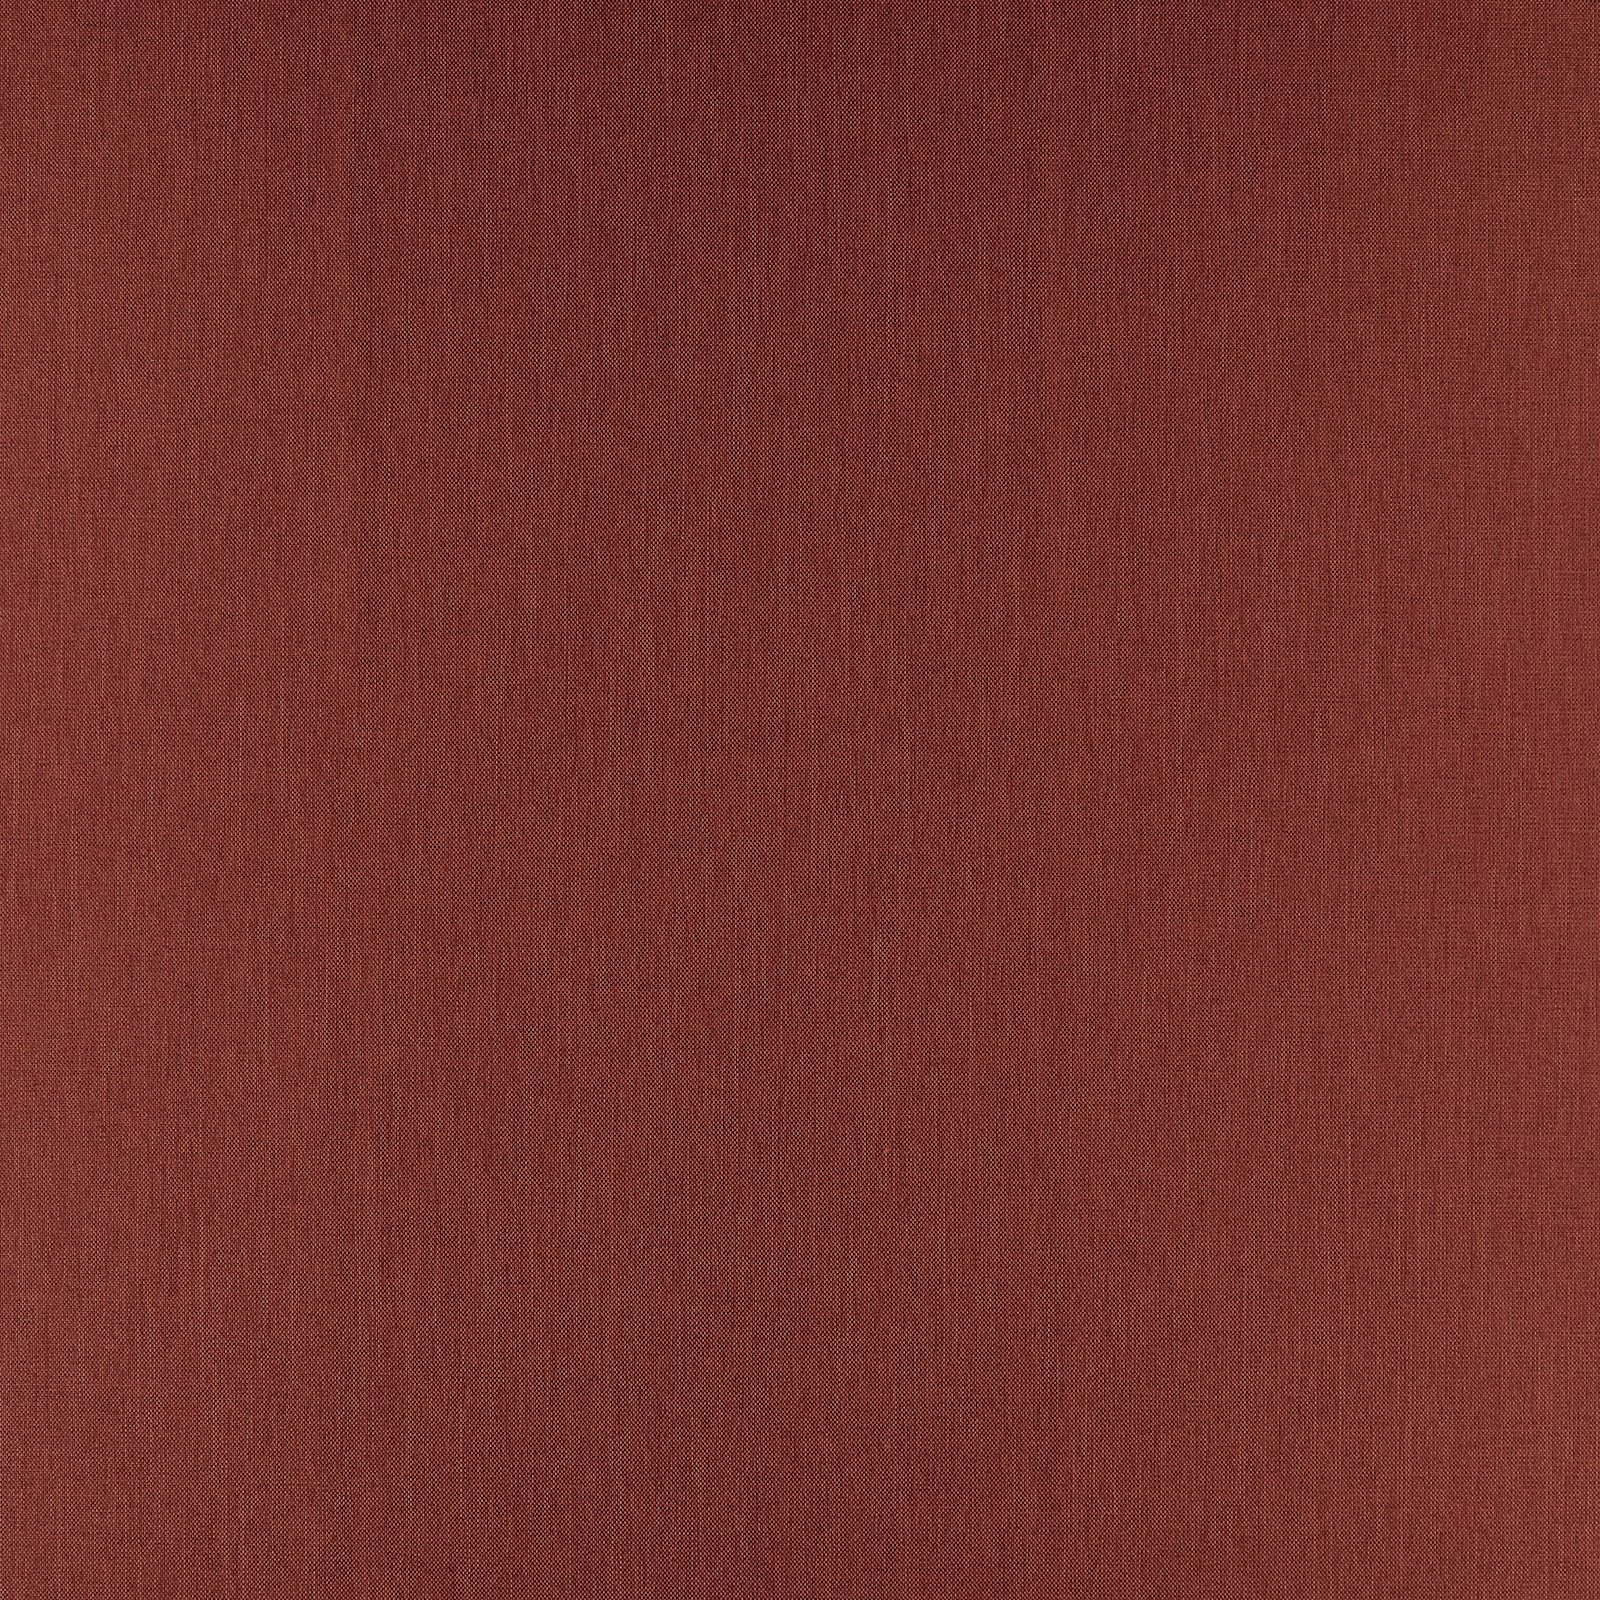 Upholstery fabric wine red melange 826585_pack_solid